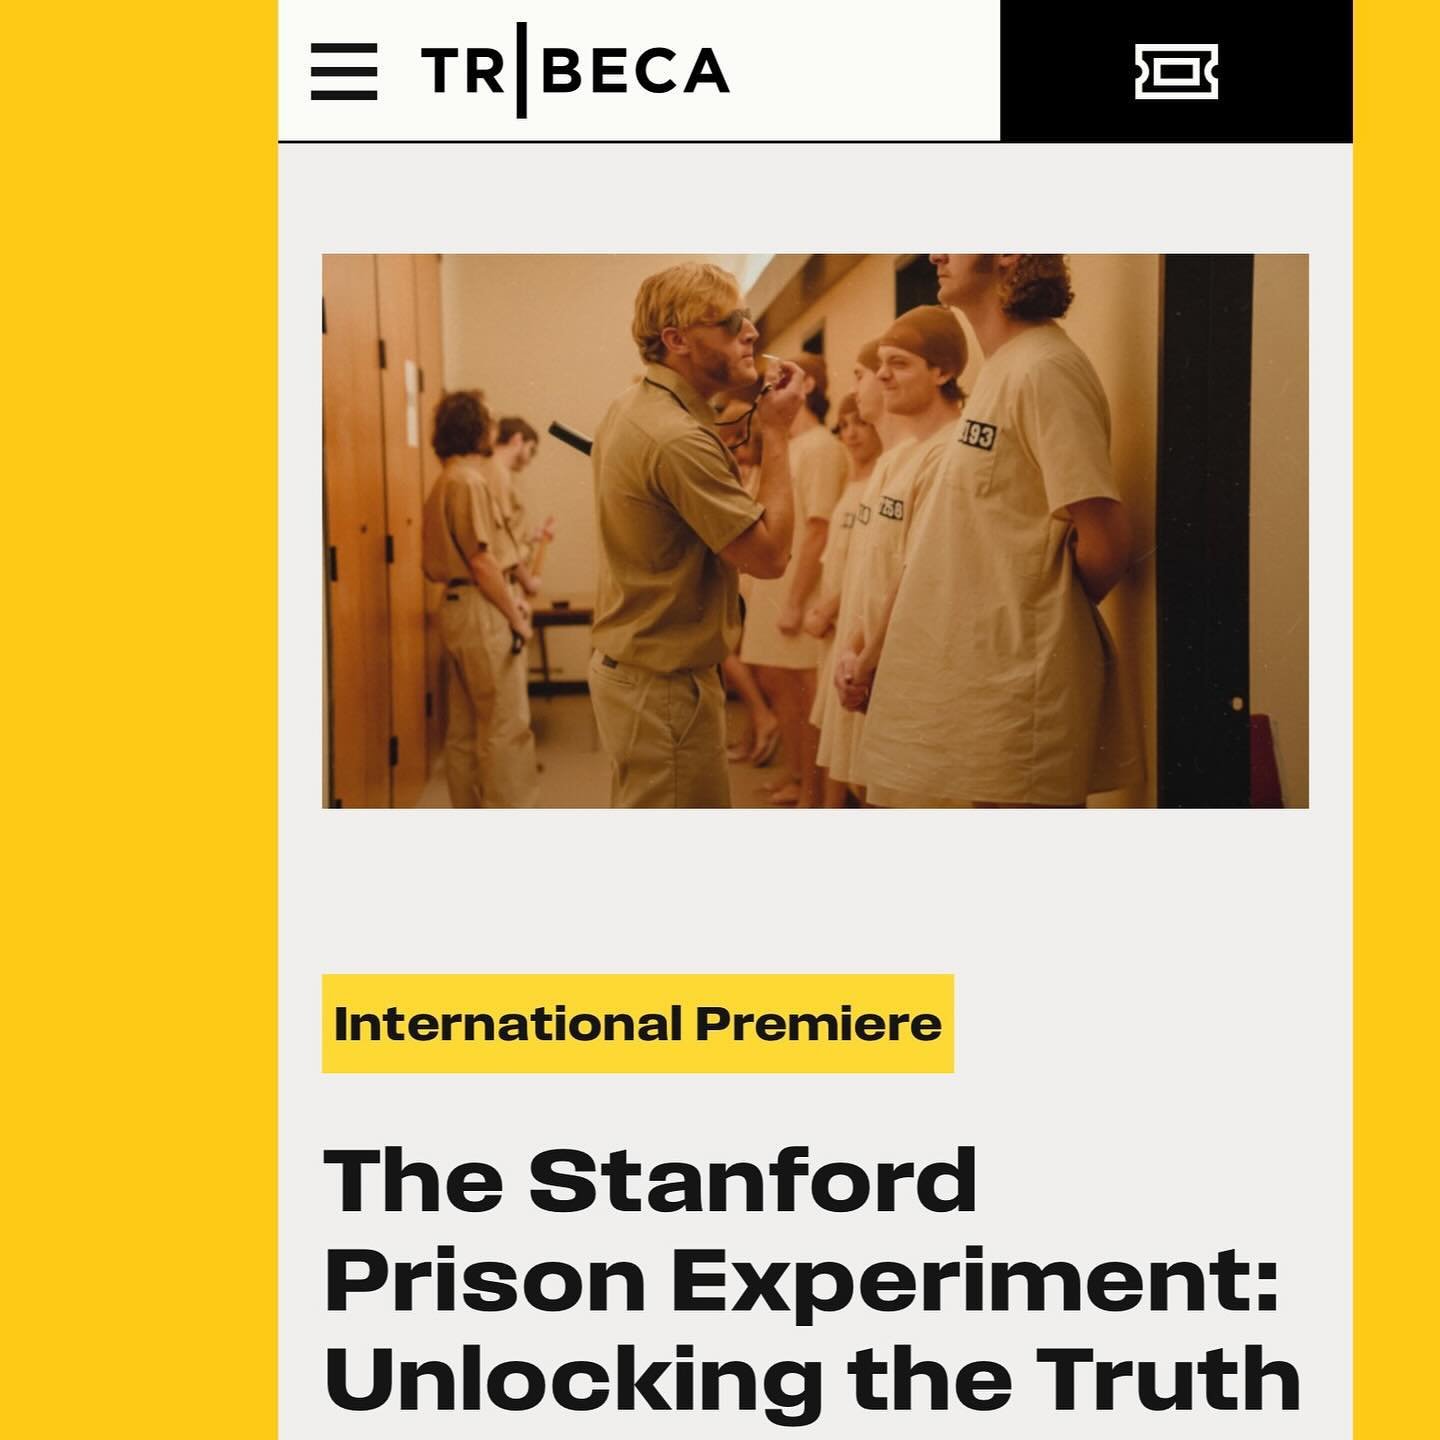 The Lord is most certainly in sprint mode. On top of the recent @deadline @hulu @natgeotv announcement, we&rsquo;re also officially going to @tribeca this summer 2024 for an &ldquo;International Premiere&rdquo; - Extremely grateful and excited for th